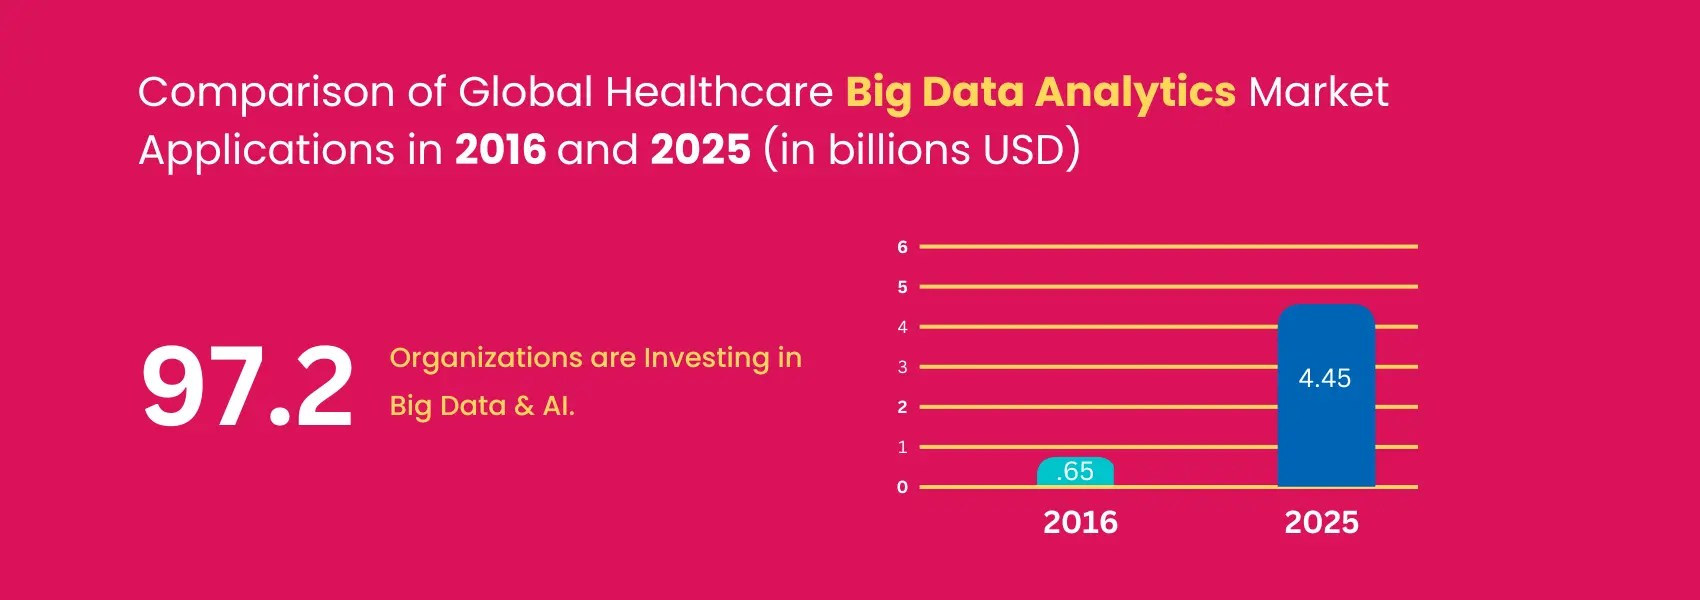 big data and analytics in healthcare